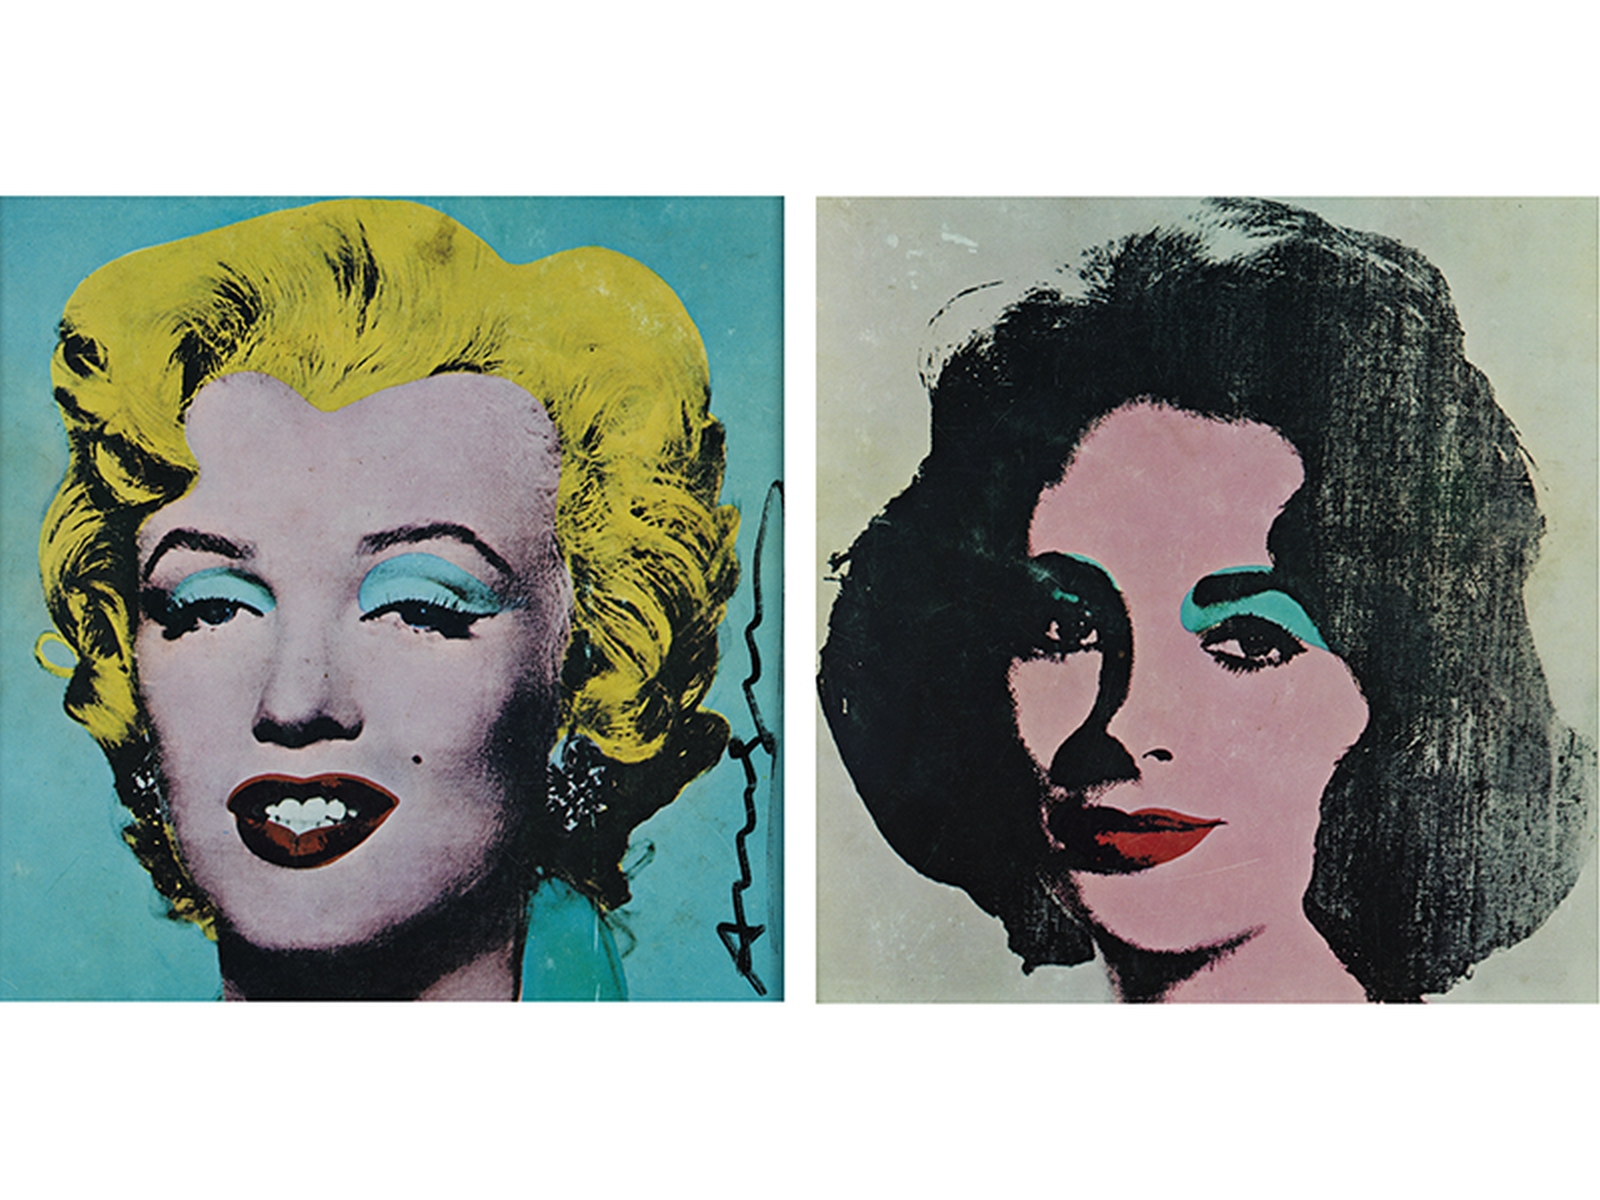 Andy Warhol, 1928 Pittsburgh "" 1987 New York Paar Farblithographien MARILYN MONROE sowie LIZ TAYLOR - Image 6 of 6